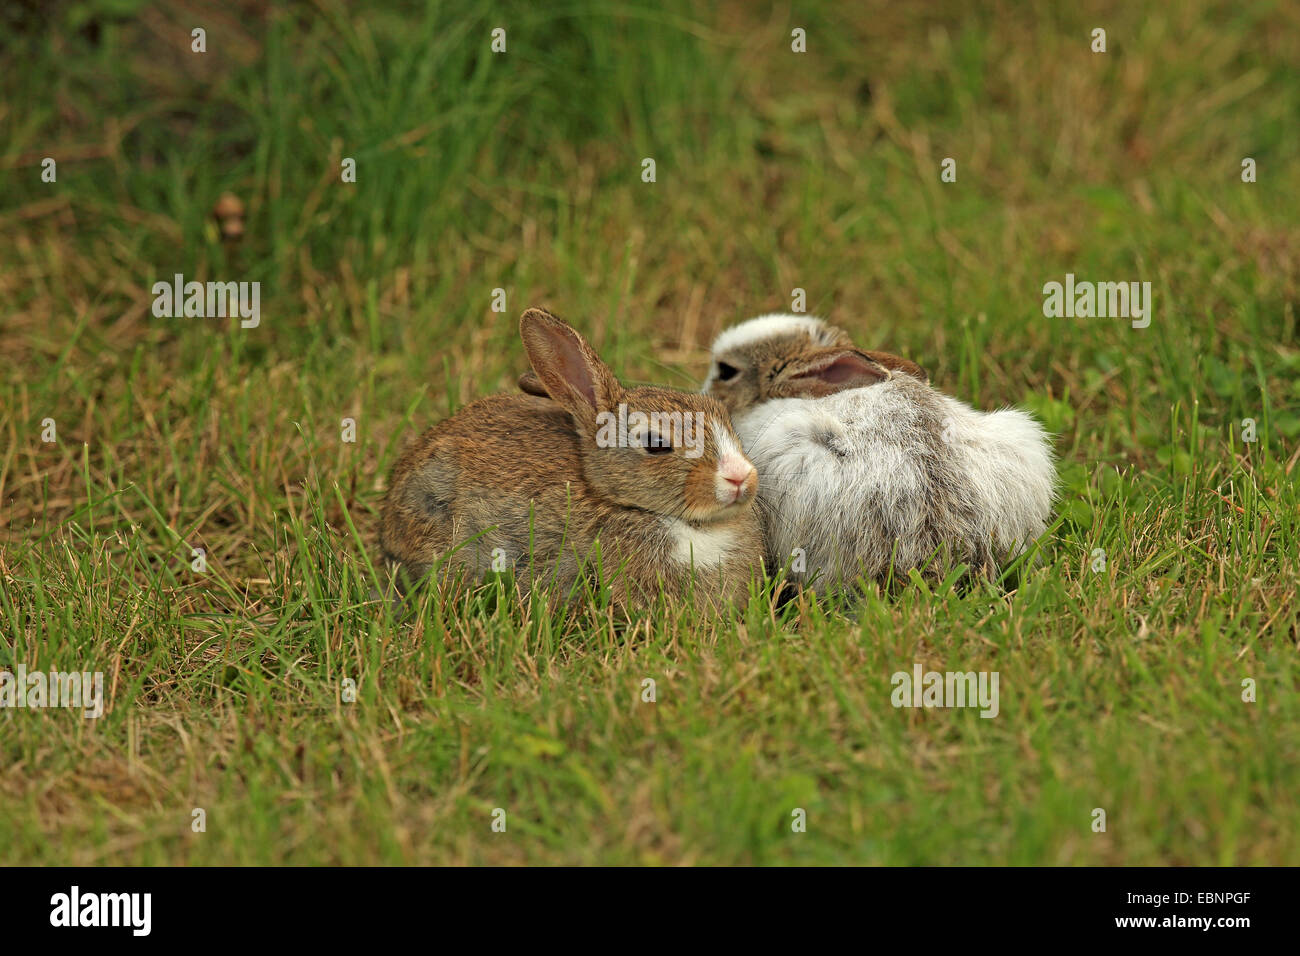 European rabbit (Oryctolagus cuniculus), two rabbits sitting next to each other in a meadow, partial leucism, Germany, Schleswig-Holstein, Sylt Stock Photo